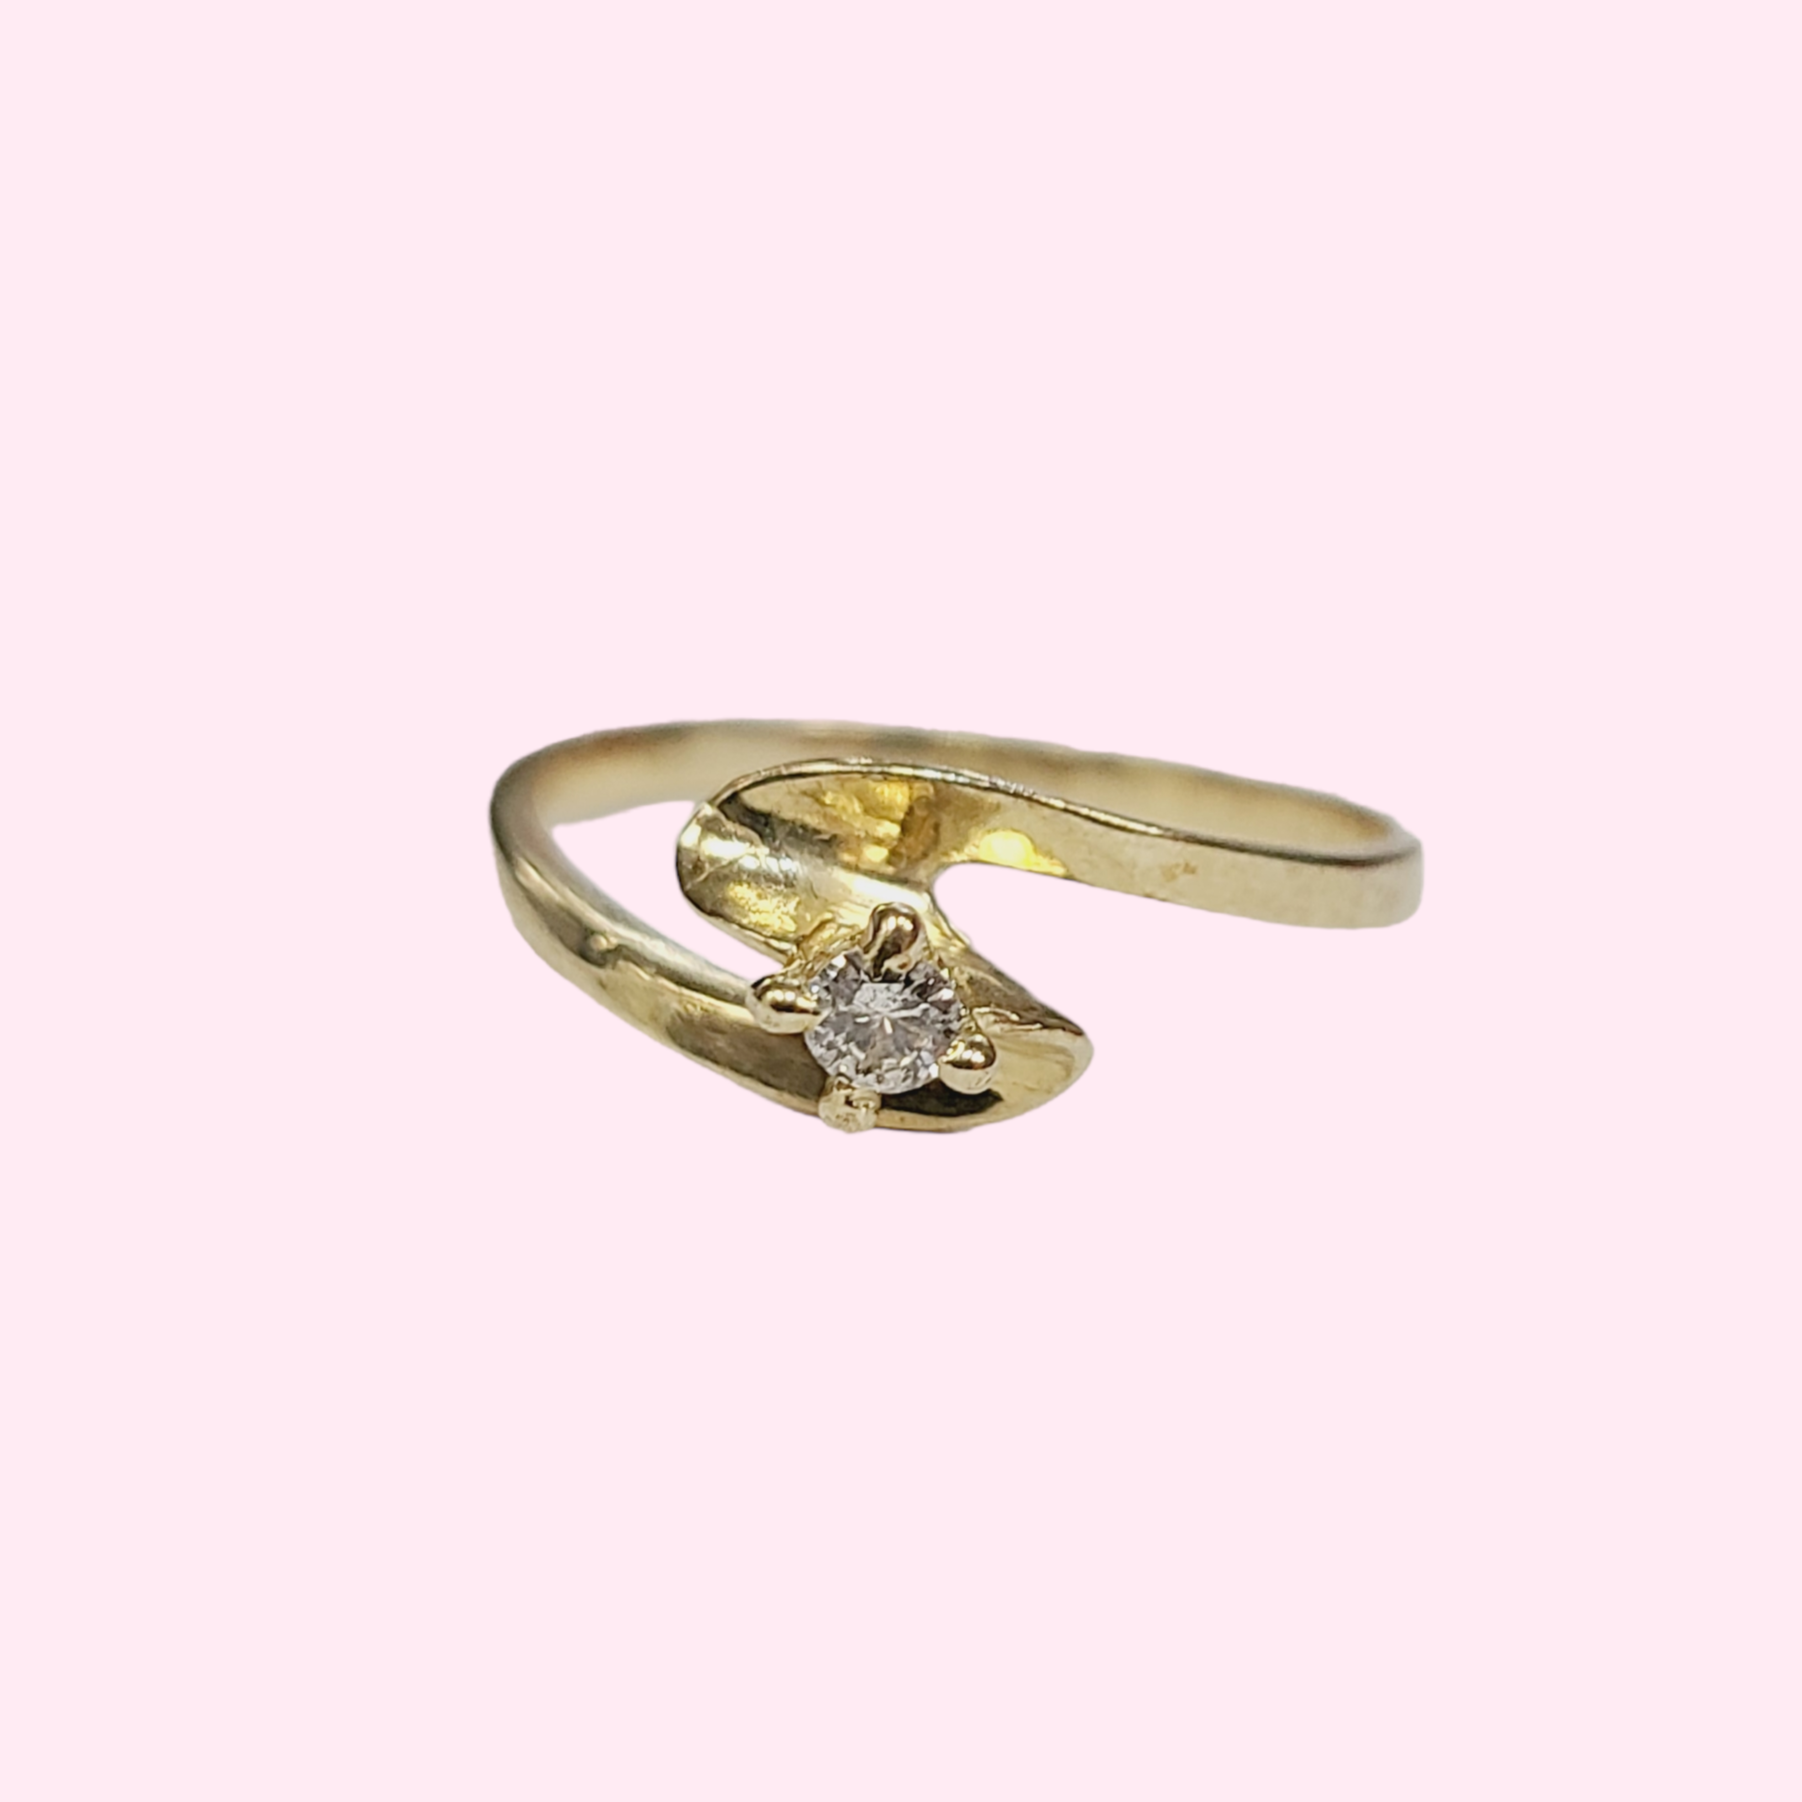 Solid 10K Yellow Gold Diamond Curved Ring Size 6.5